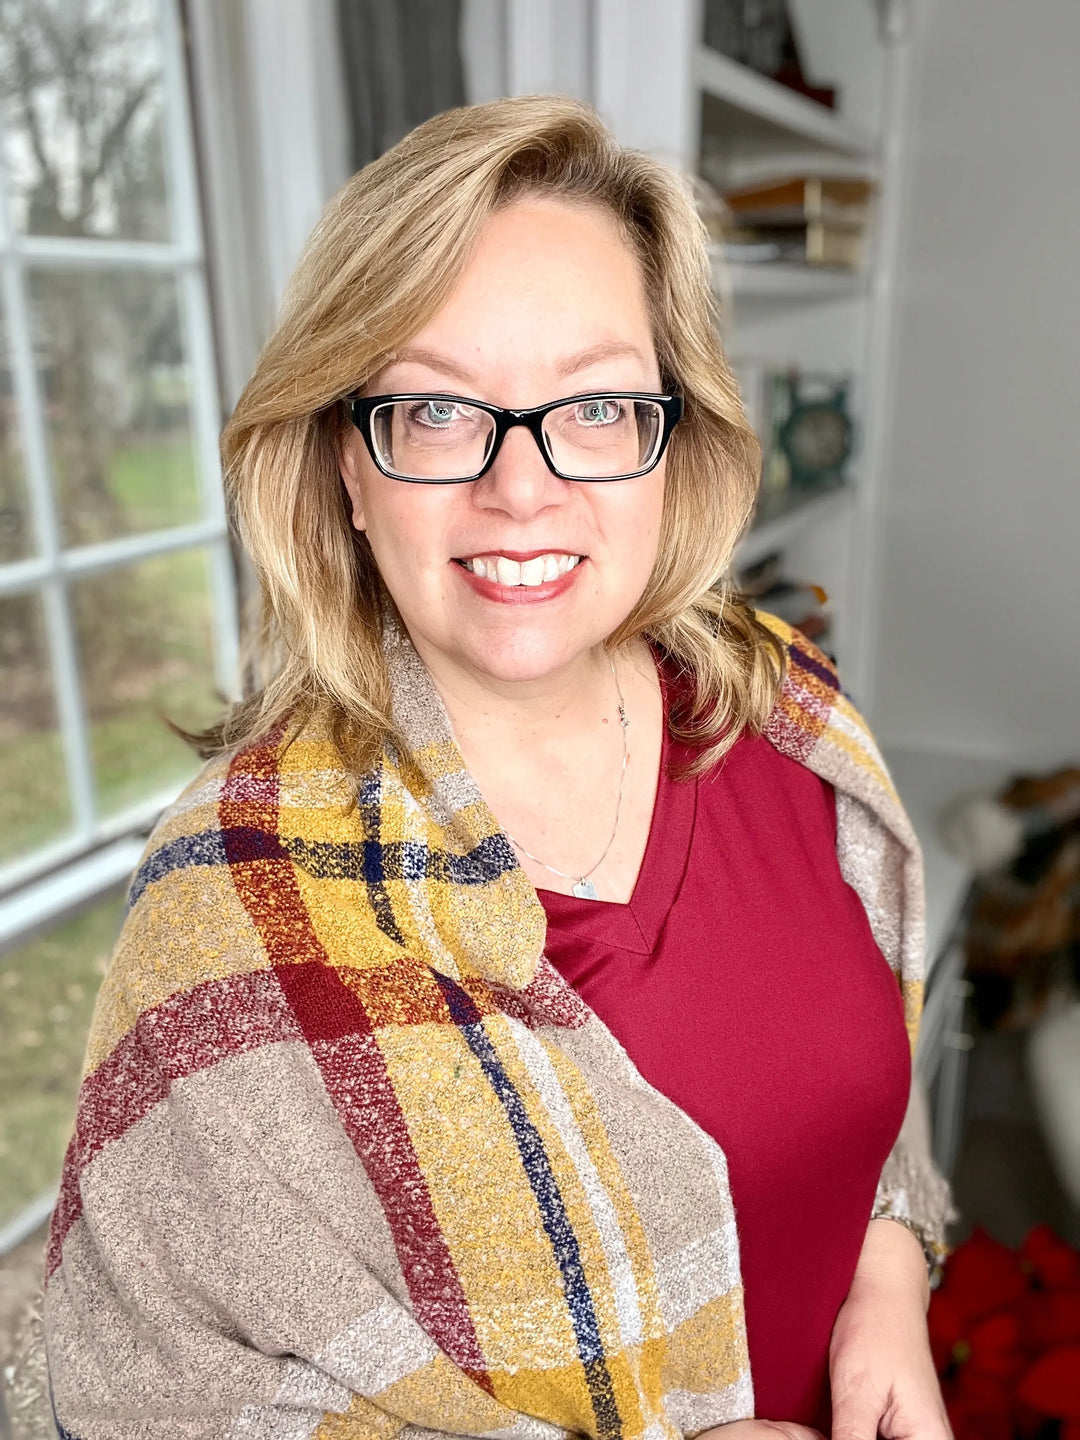 Soft Knit Plaid Blanket Scarf (3 patterns)-scarf-Judson-Styled by Steph-Women's Fashion Clothing Boutique, Indiana